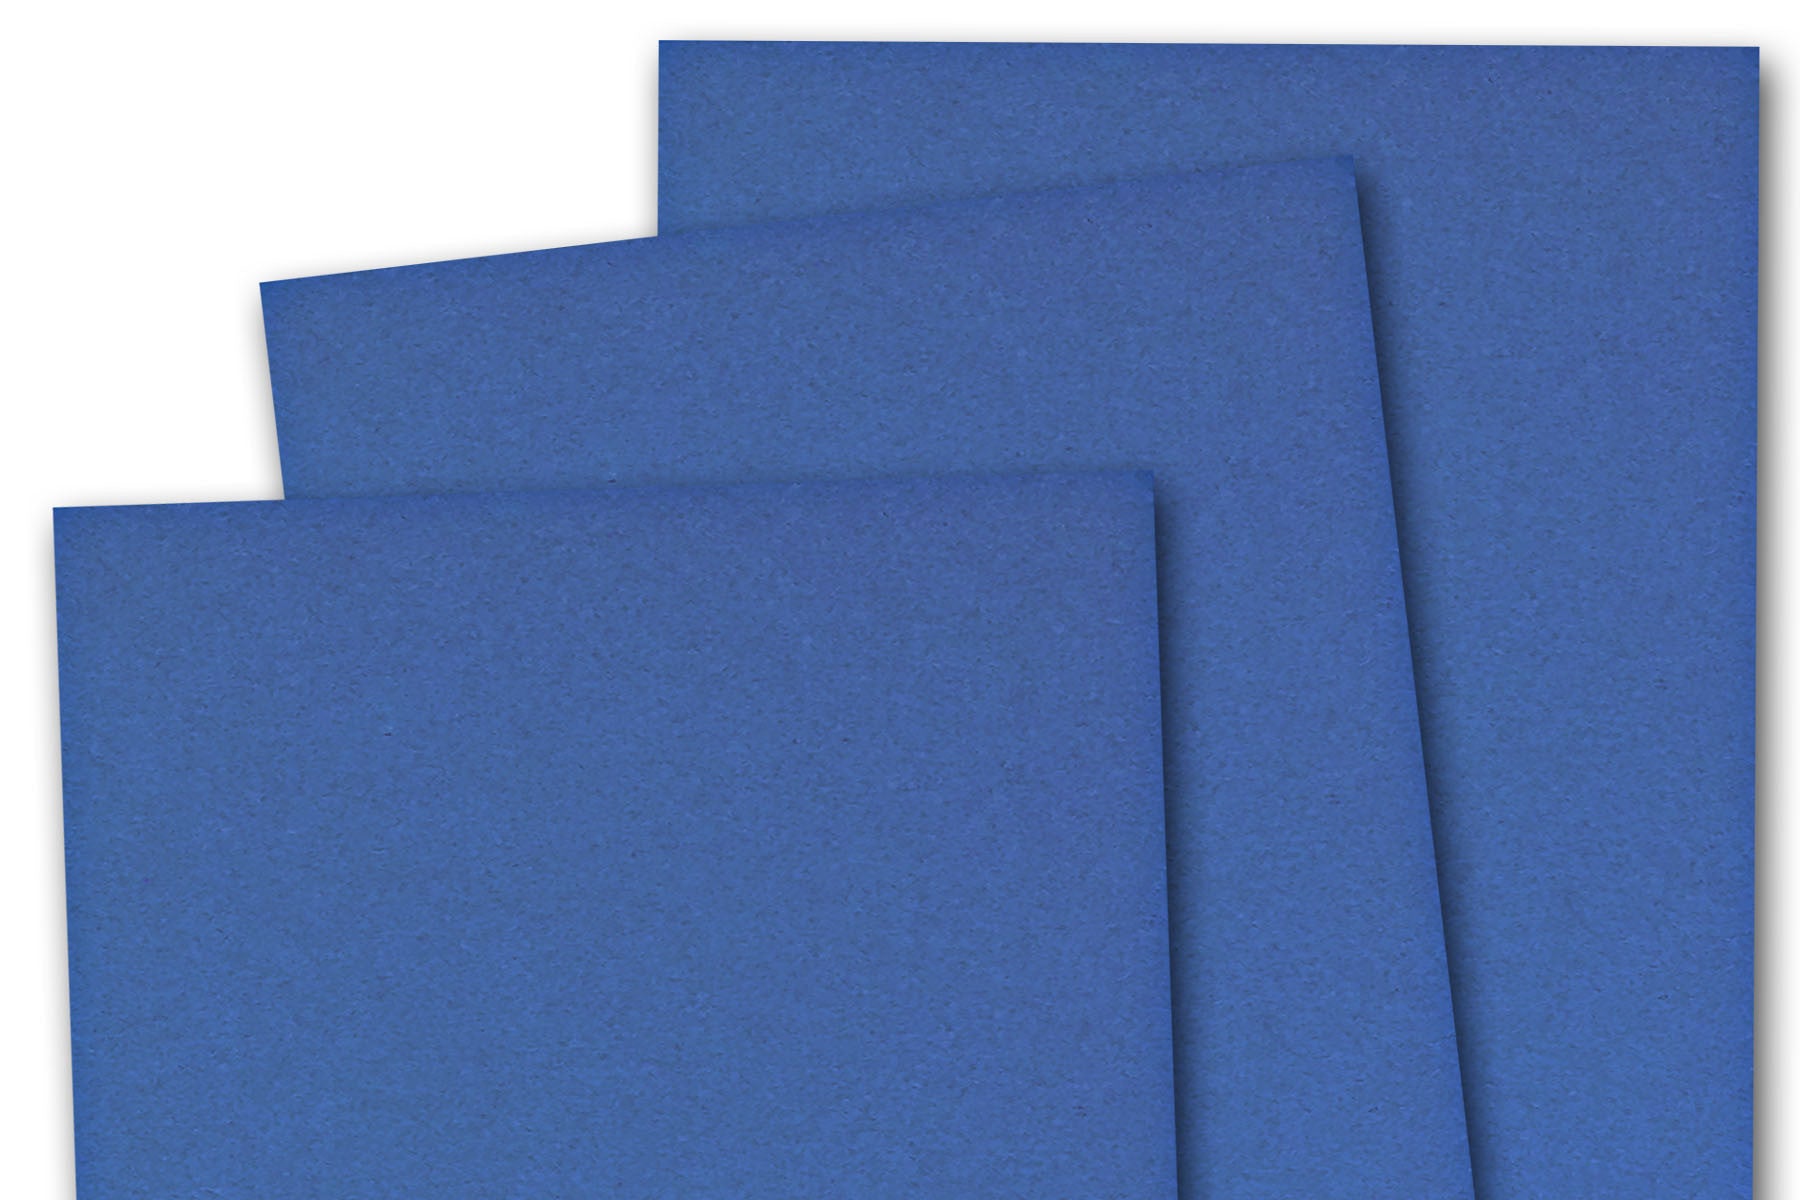 Light Blue 11-x-17 BASIS Paper, 100 per package, 216 GSM (80lb Cover)